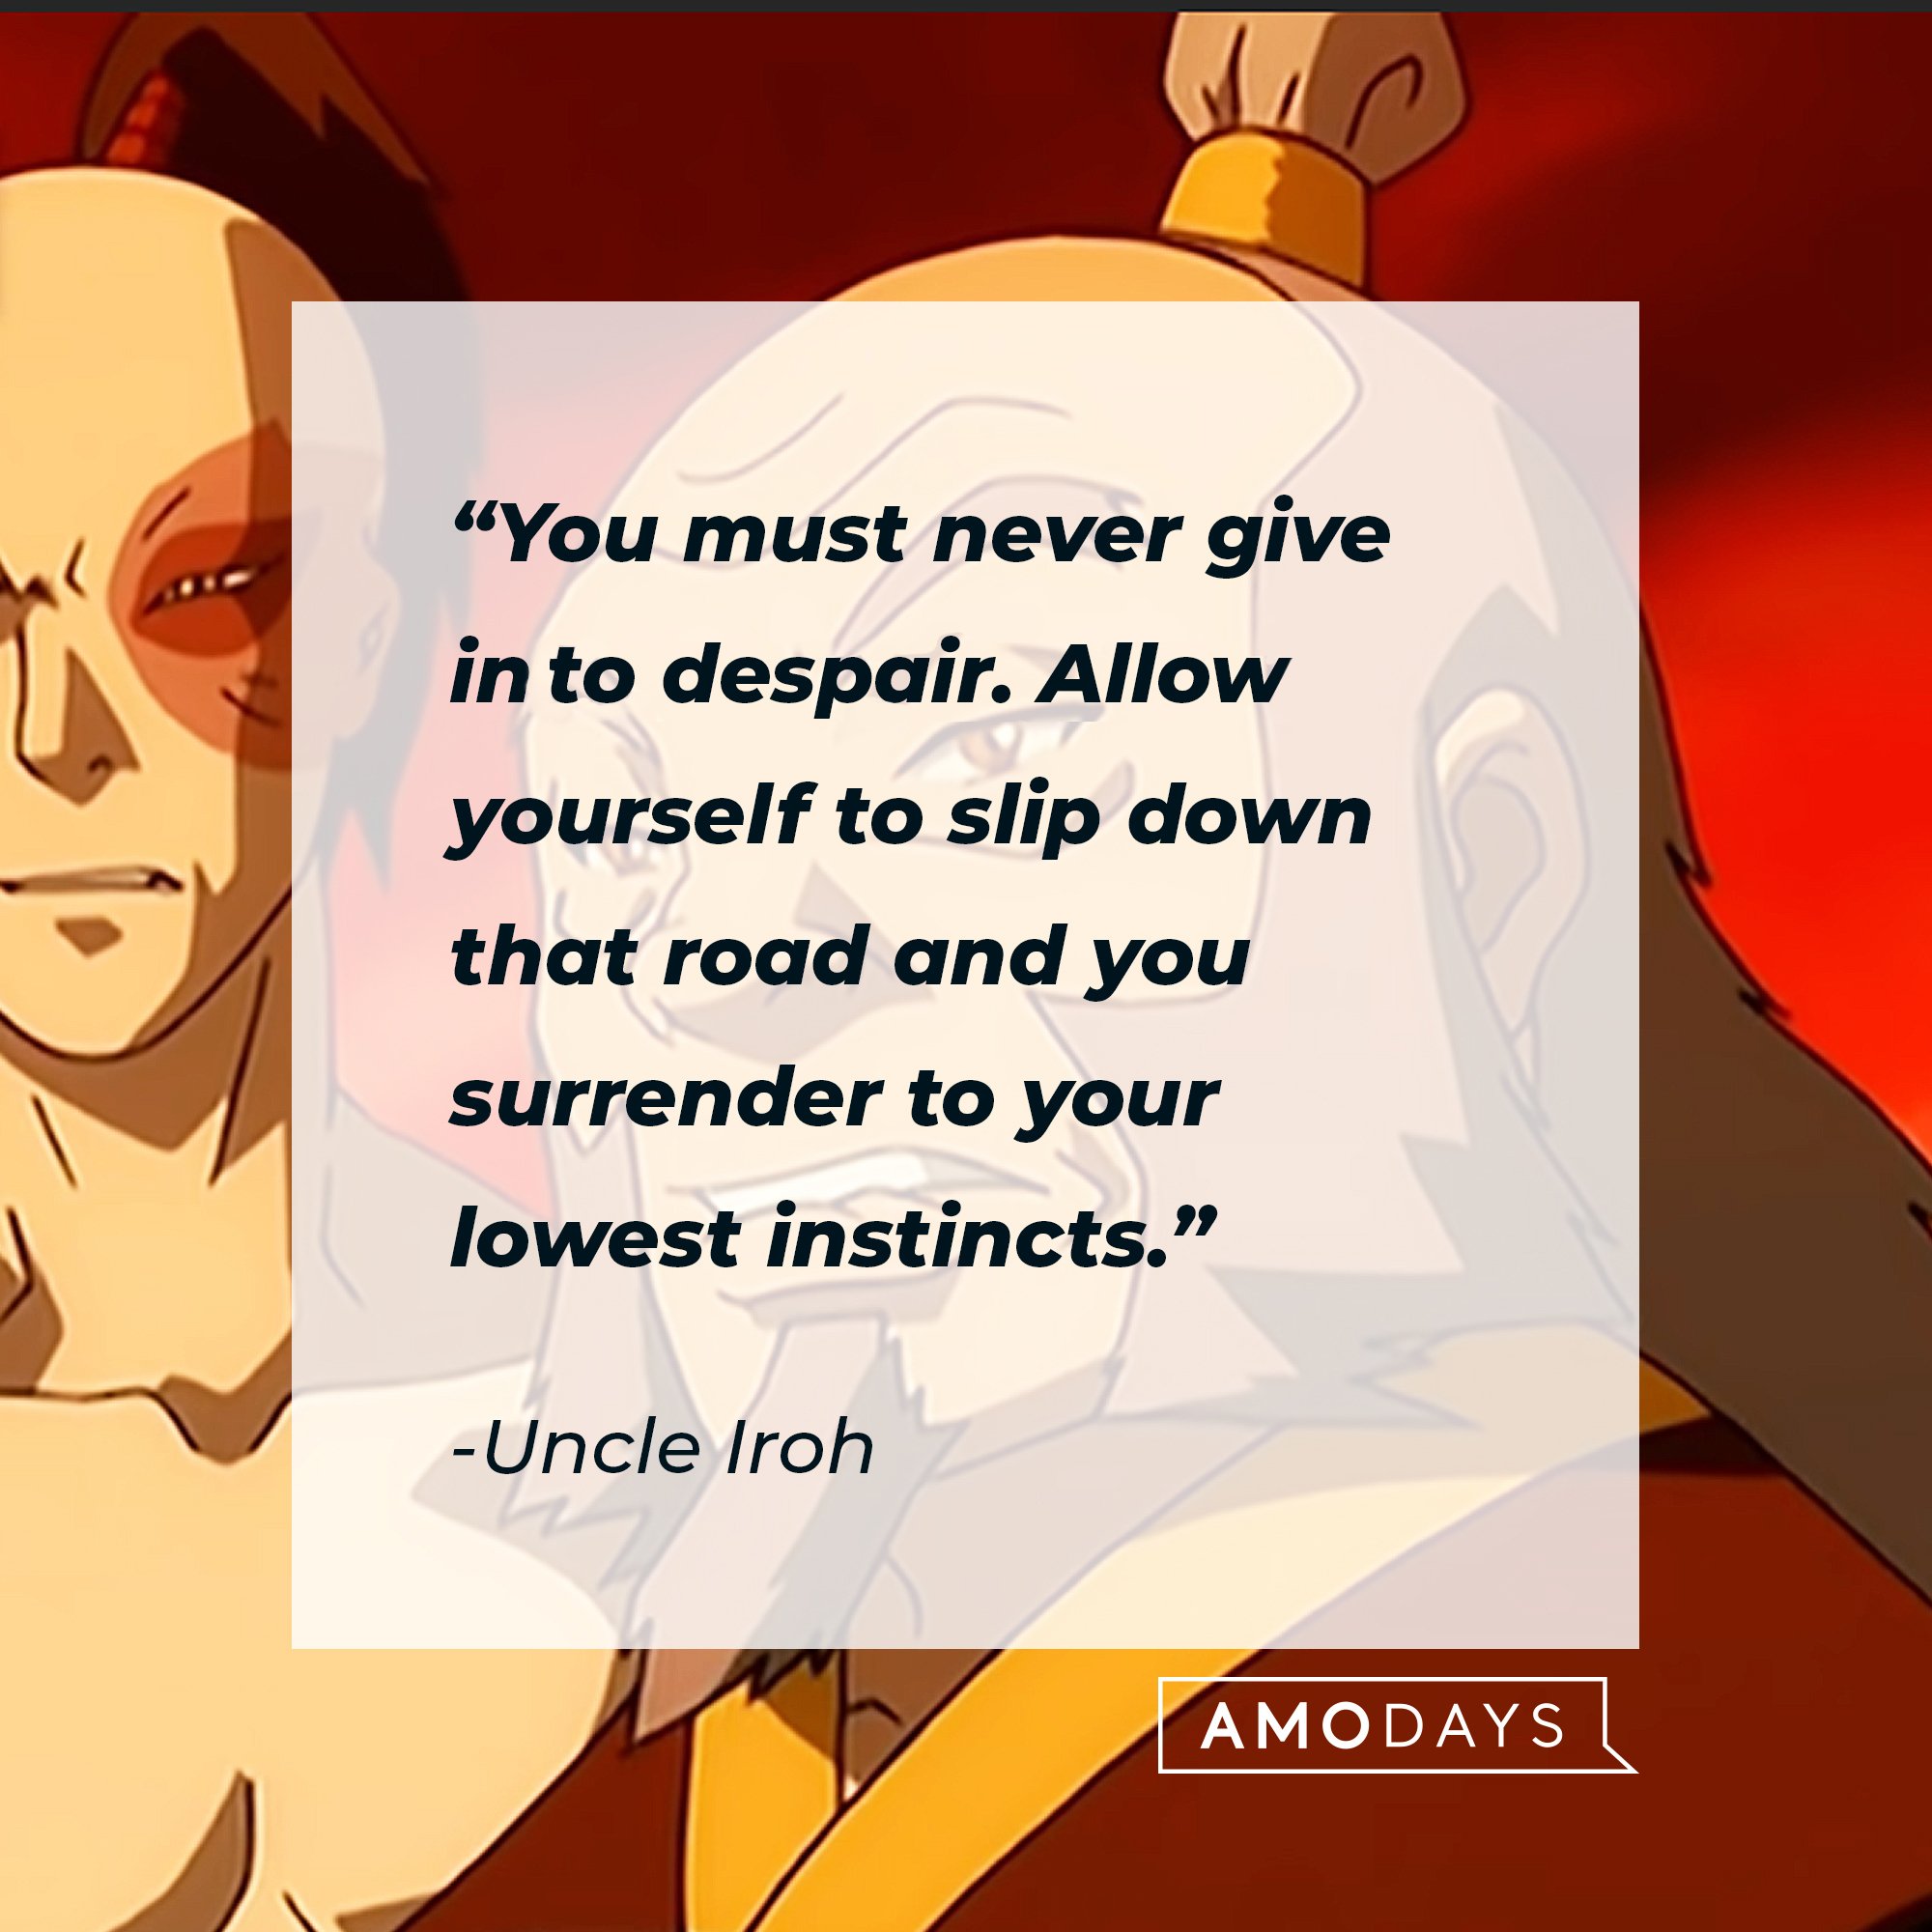 Uncle Iroh's quote: “You must never give in to despair. Allow yourself to slip down that road and you surrender to your lowest instincts.” | Image: AmoDays